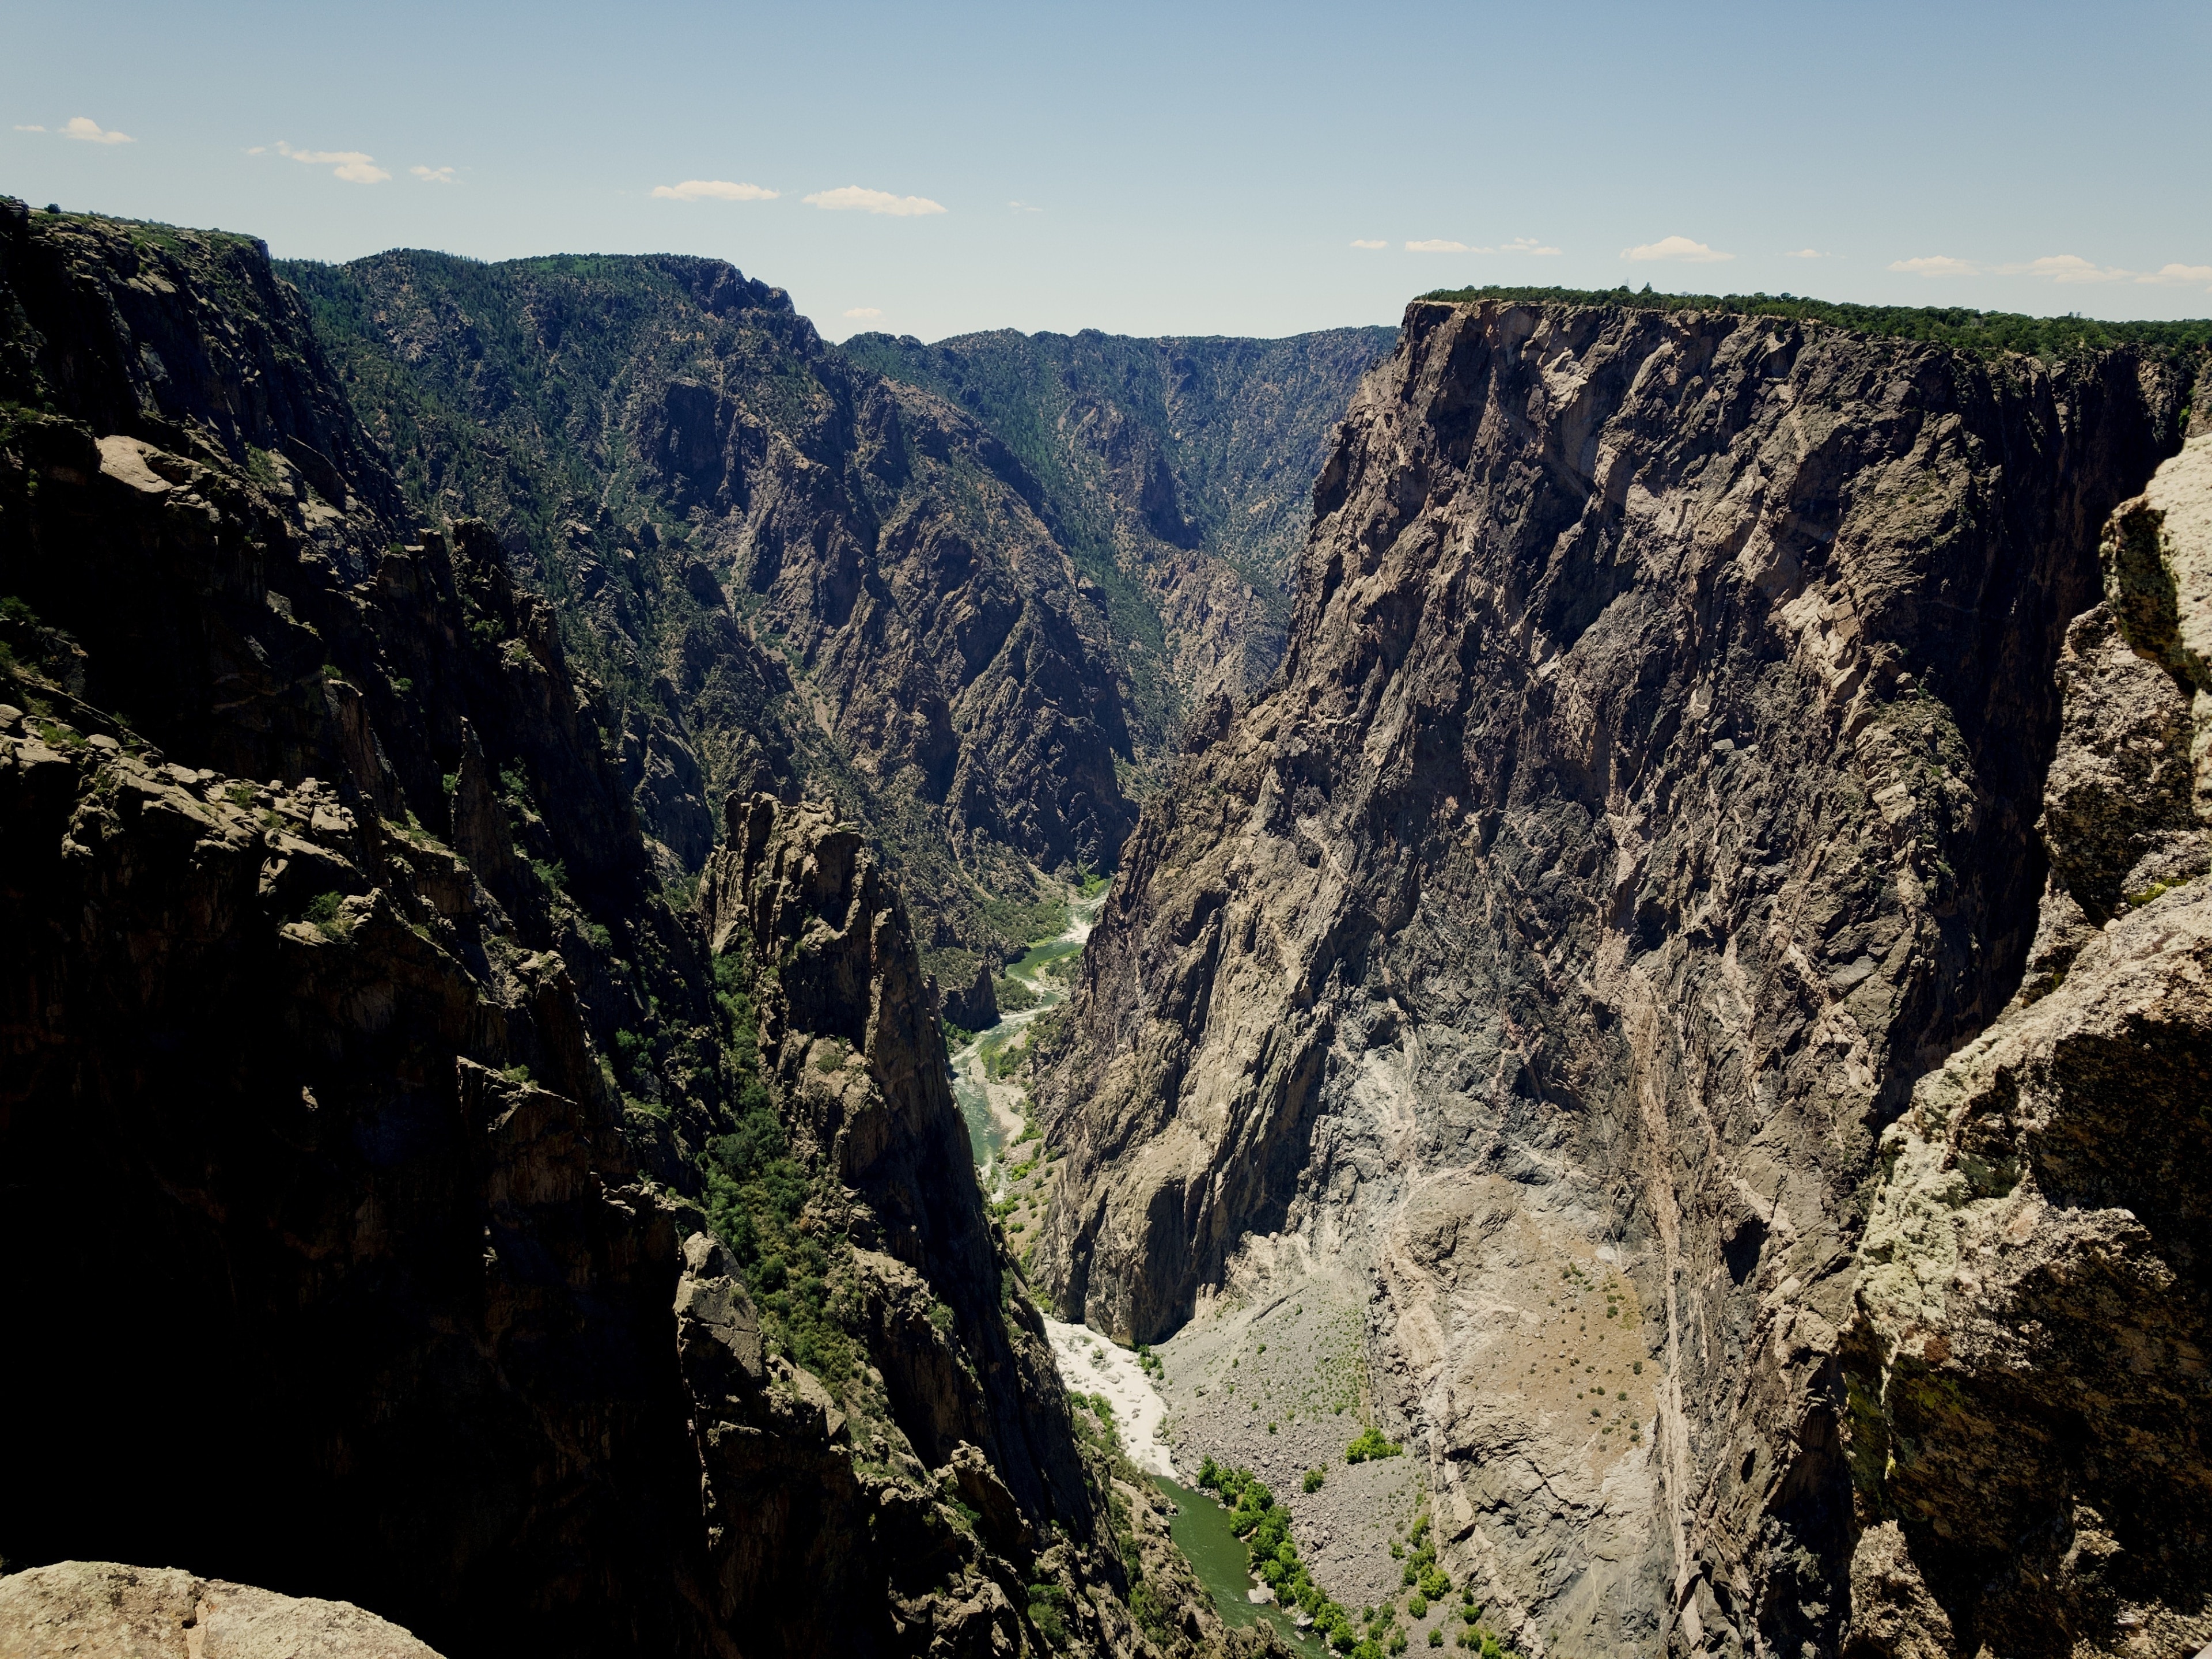 Black Canyon of Gunnison. Magnificent. Just dizzying in its beauty.  A sign there told us that the Empire State Building would only come halfway up the Painted Wall!